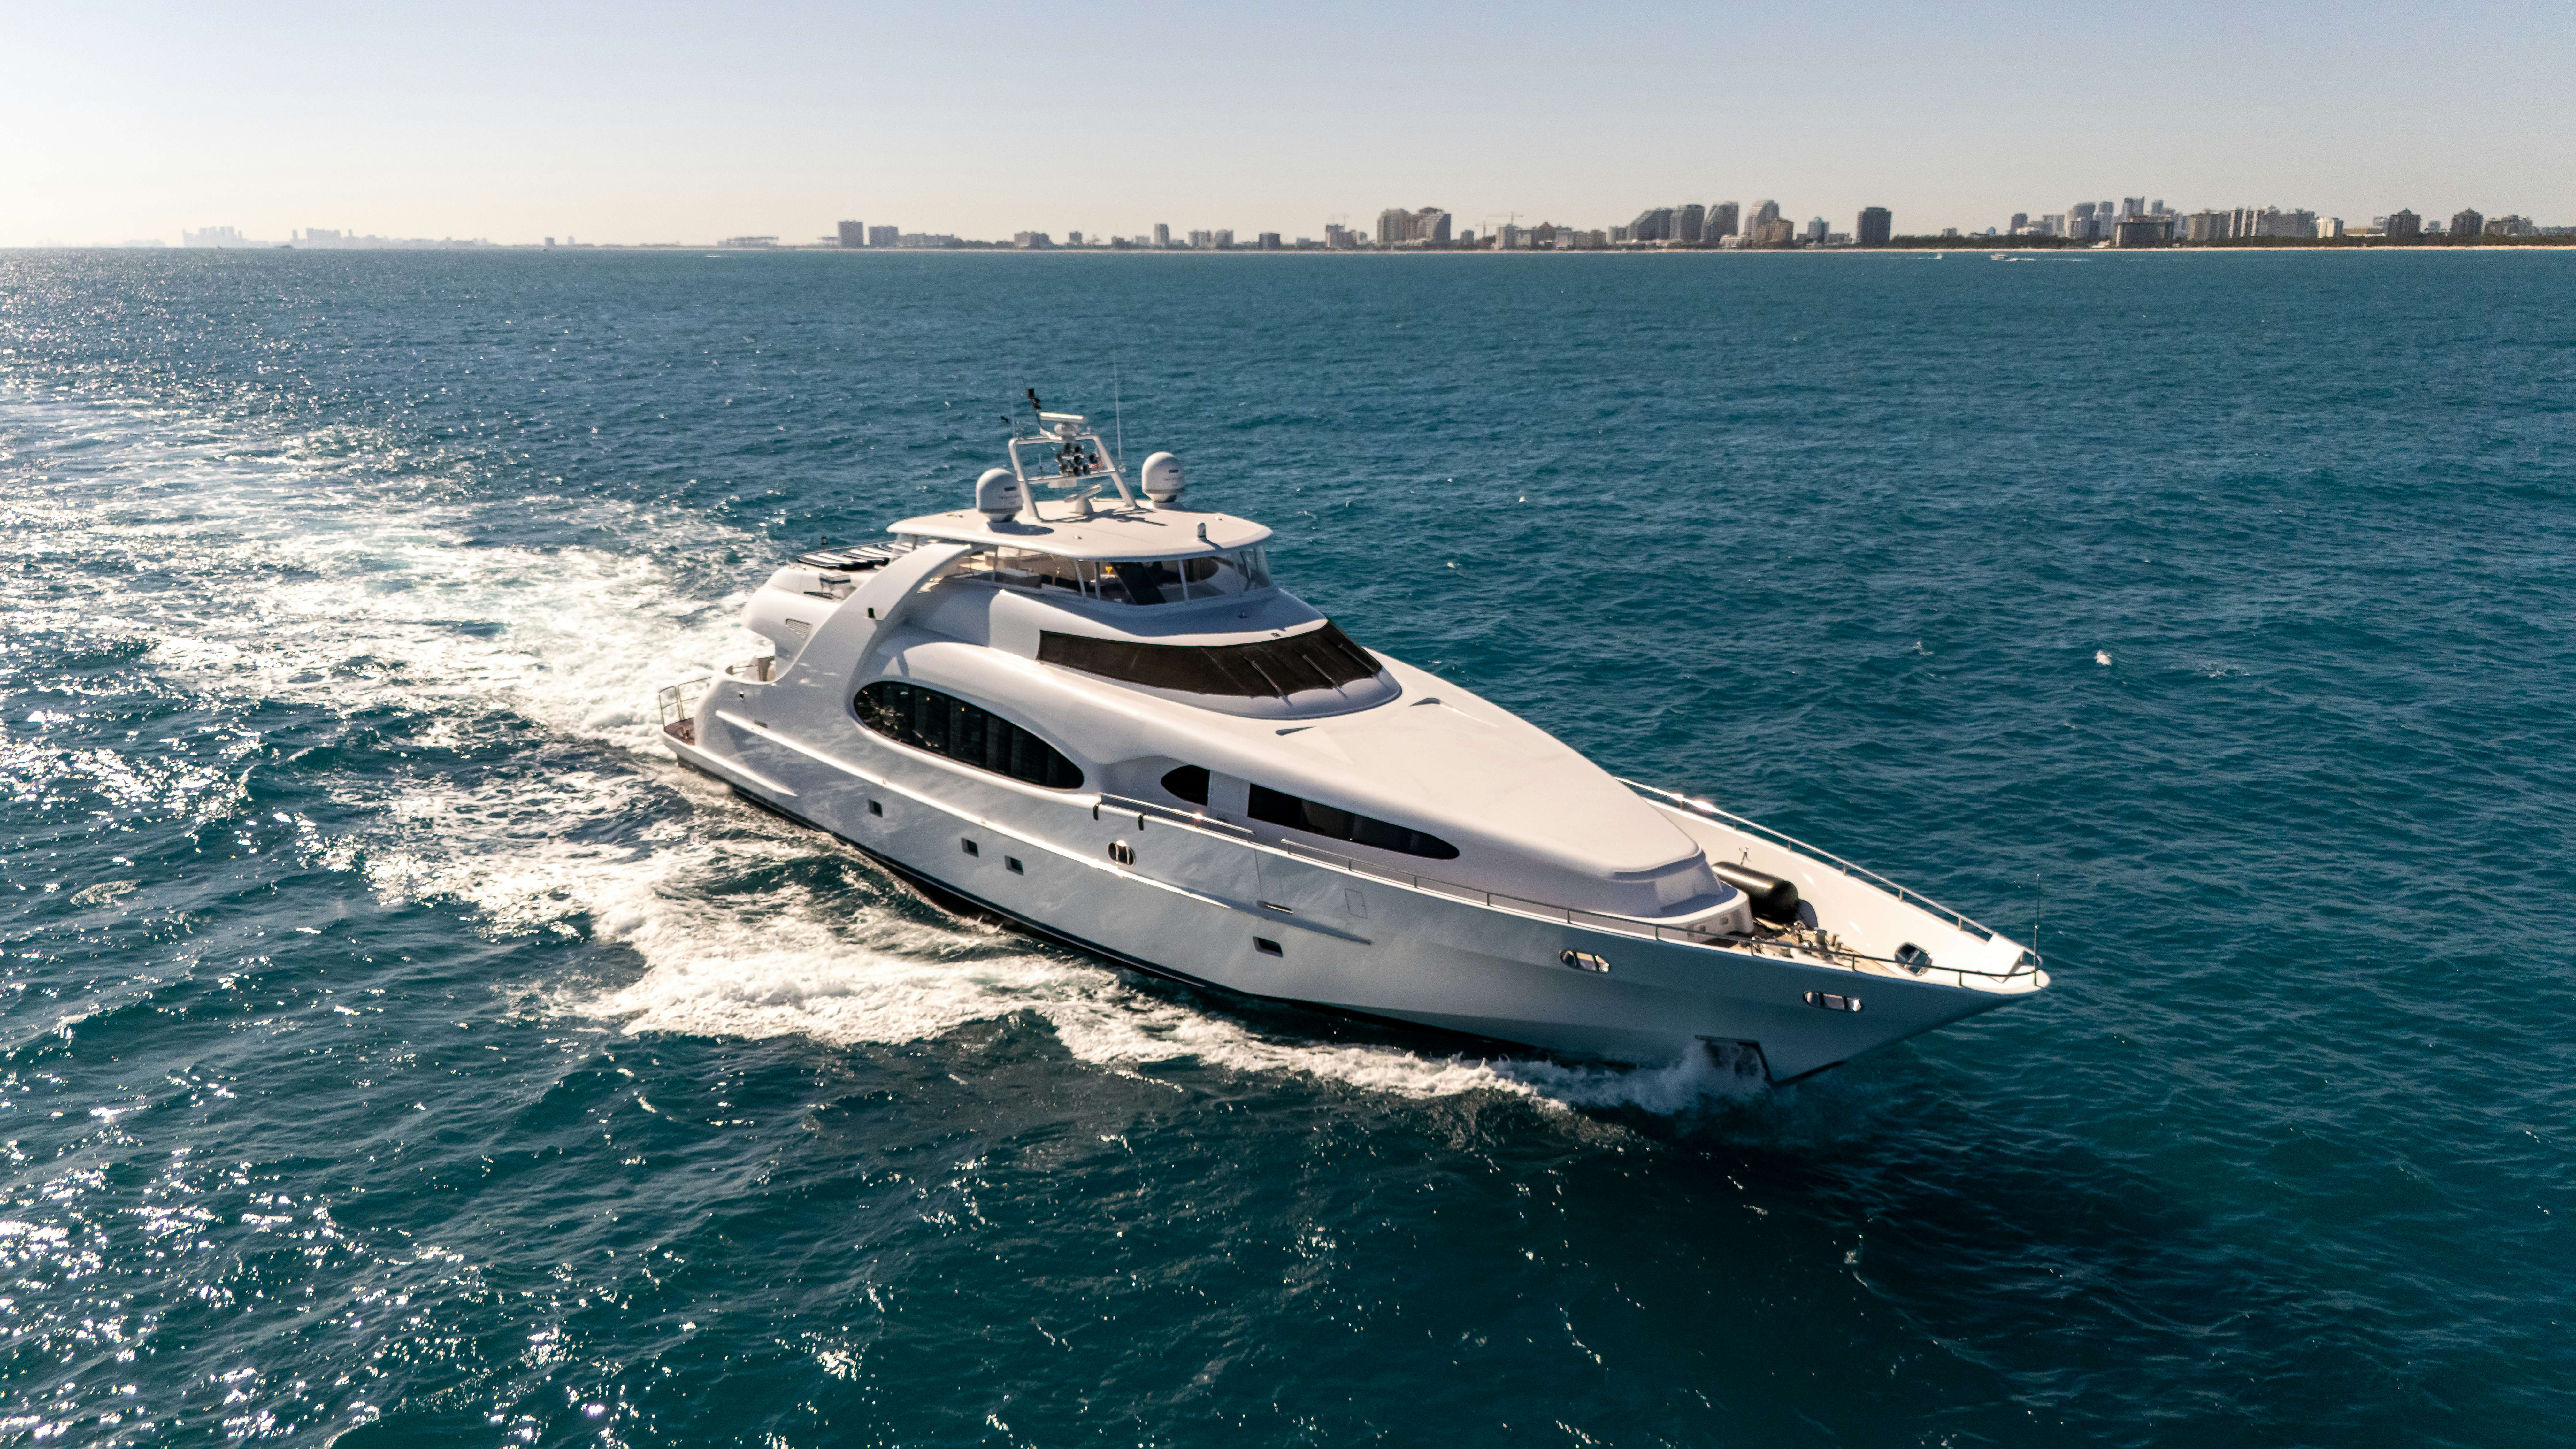 Watch Video for GRANDEUR Yacht for Sale